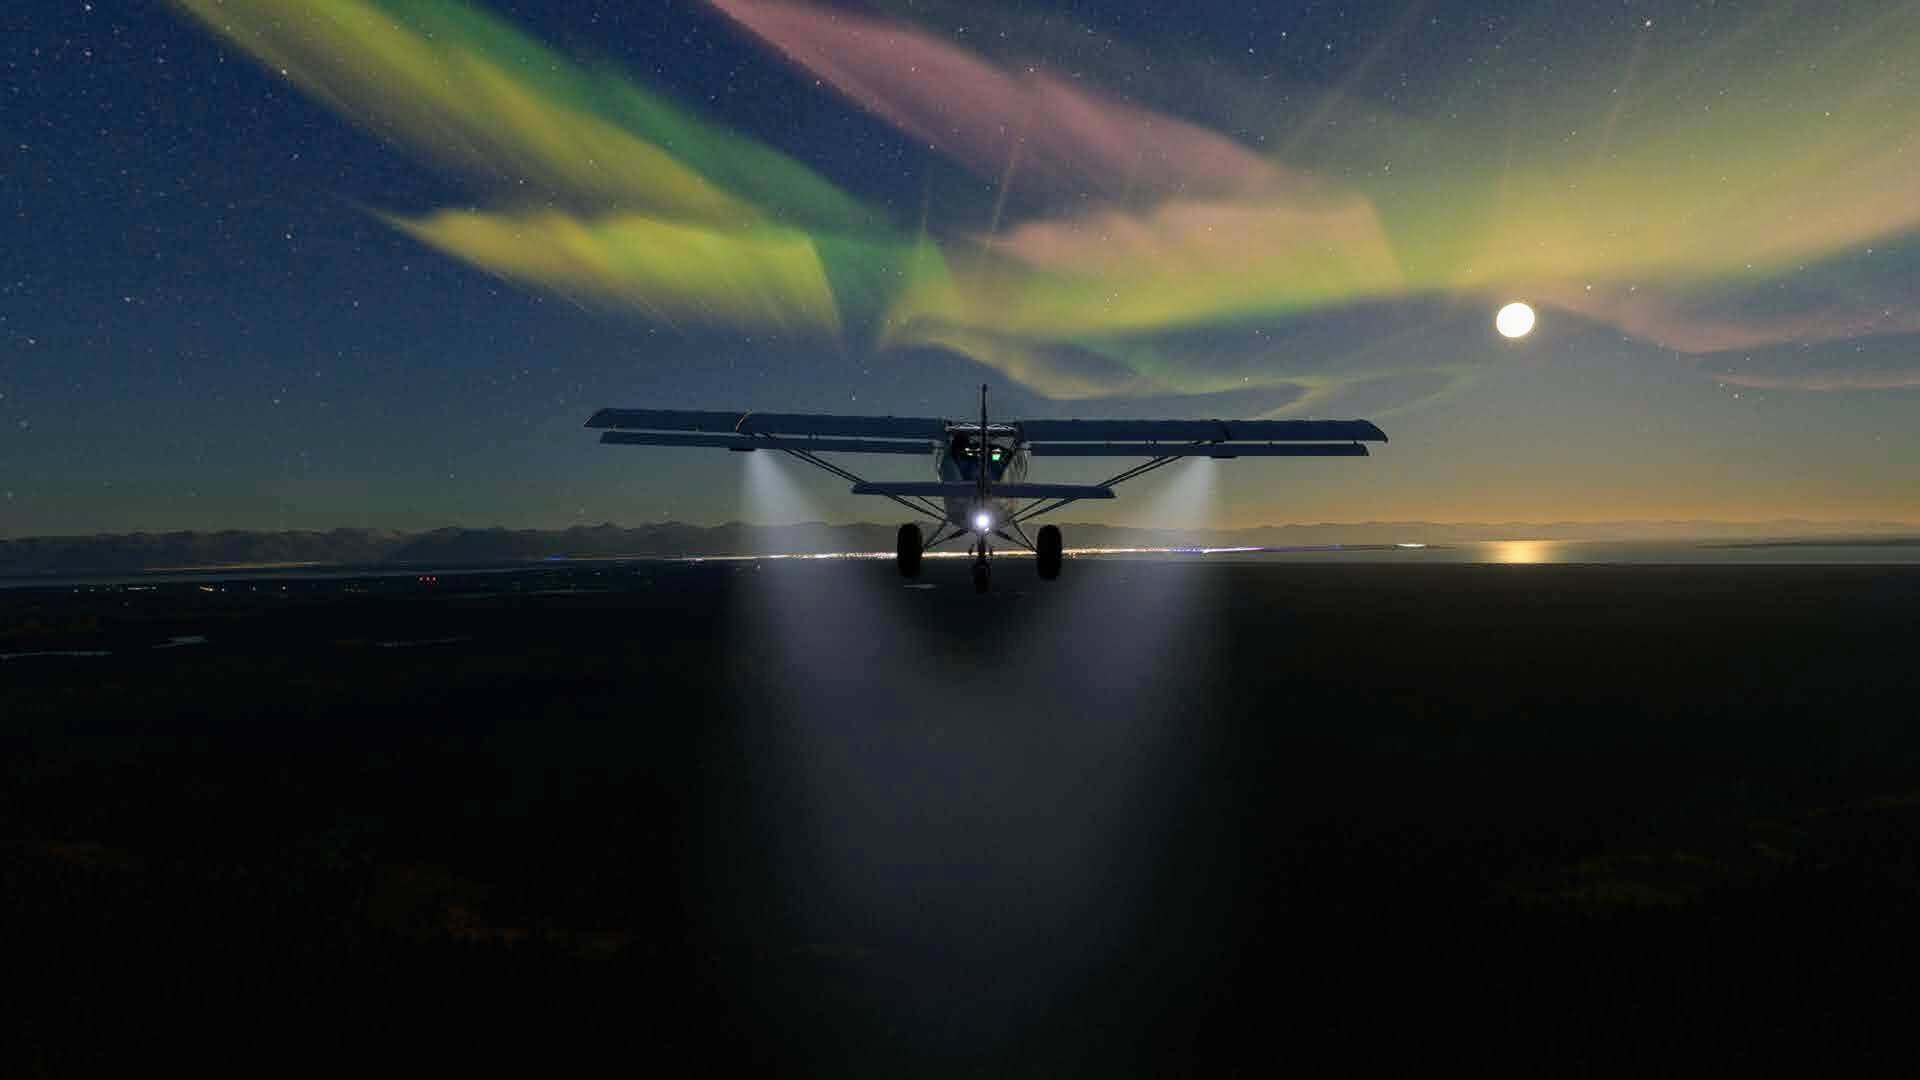 An X Cub with landing lights illuminating the ground and the Aurora Borealis lighting up the sky above.